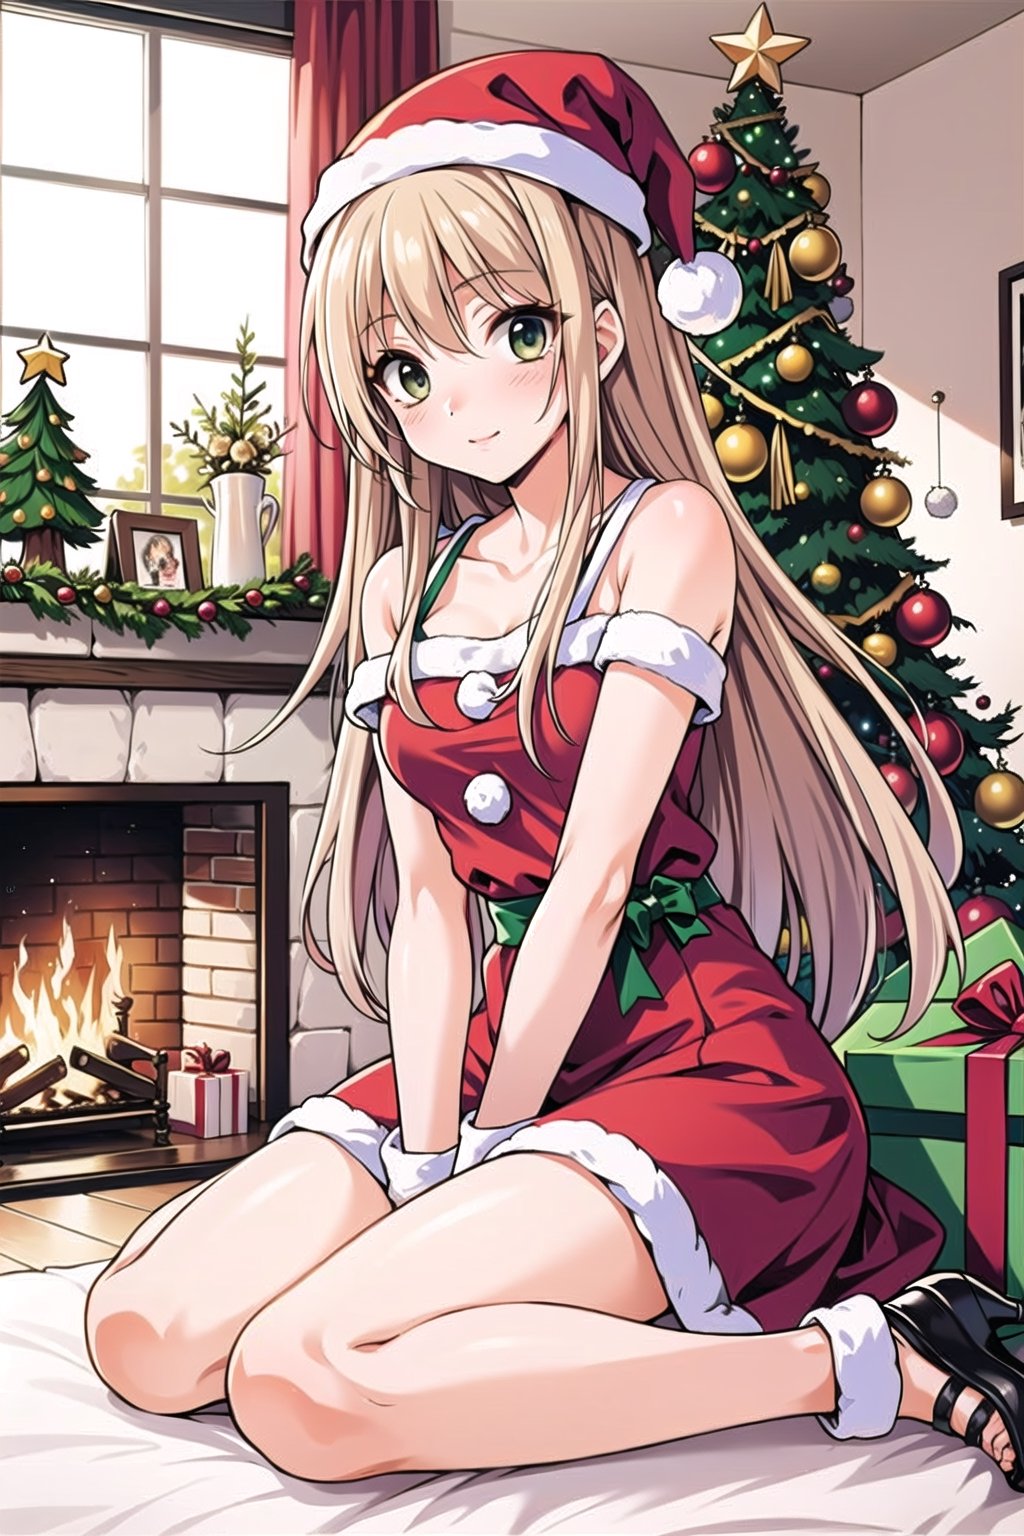 (Best Picture Quality, High Quality, Best Picture Score: 1.3), , Perfect beautiful woman,blonde hair,long hair,(Decorate the room with Santa Claus for Christmas.),the whole body Beautiful Girl, Cute, ,Fantastic Landscapes,Christmas tree, a cozy fireplace